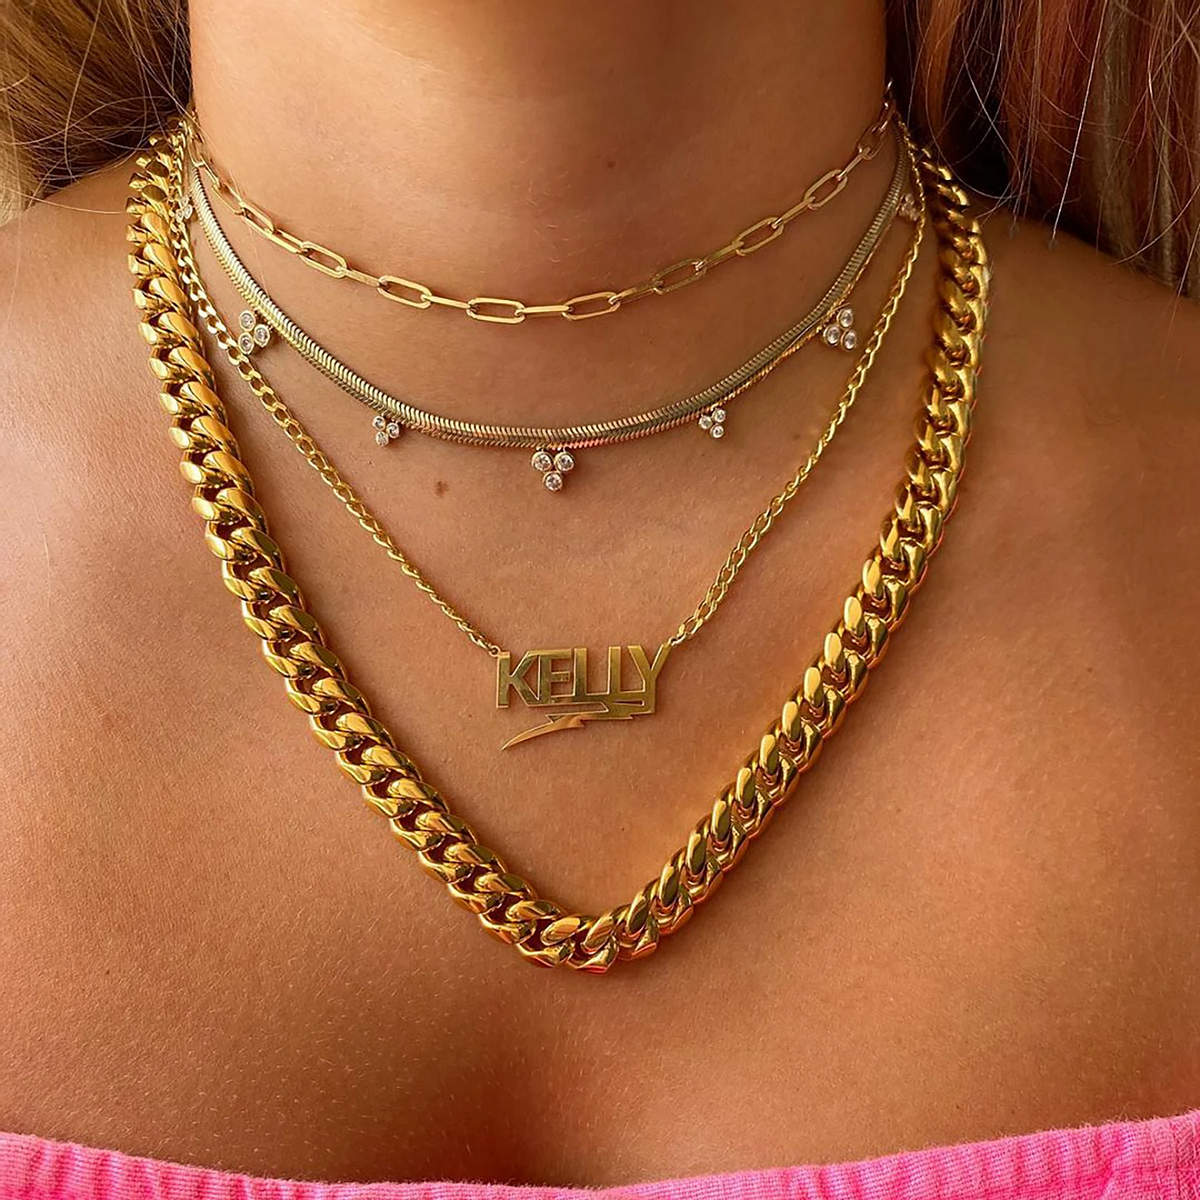 The Headliner Personalized Name Necklace